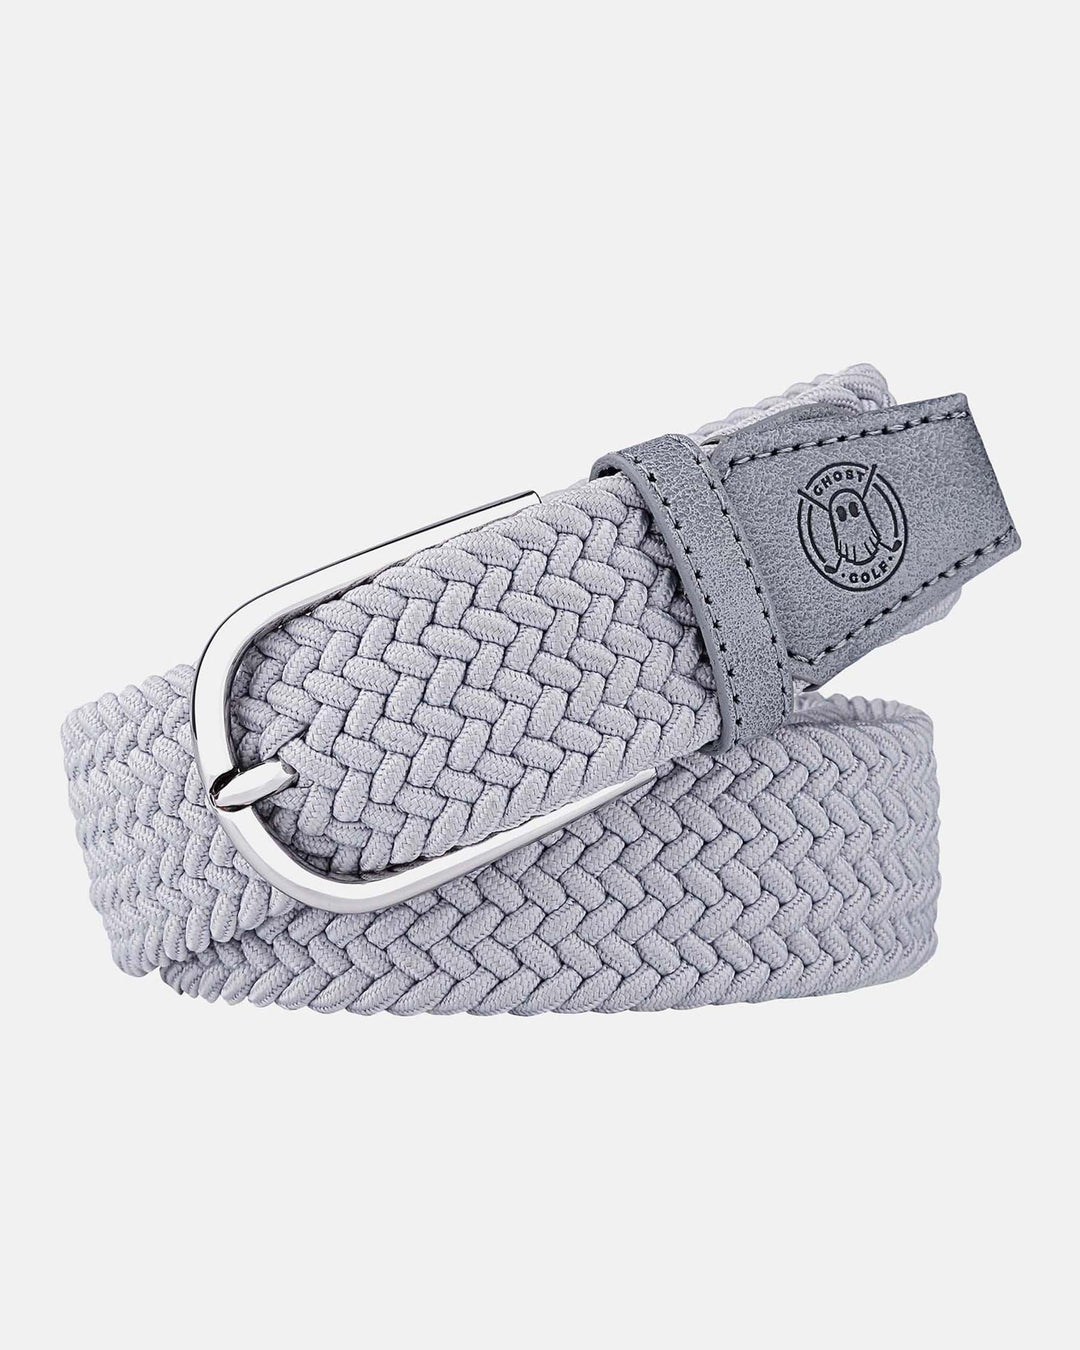 Review: Ghost Golf Braided Belts - SwingU Clubhouse